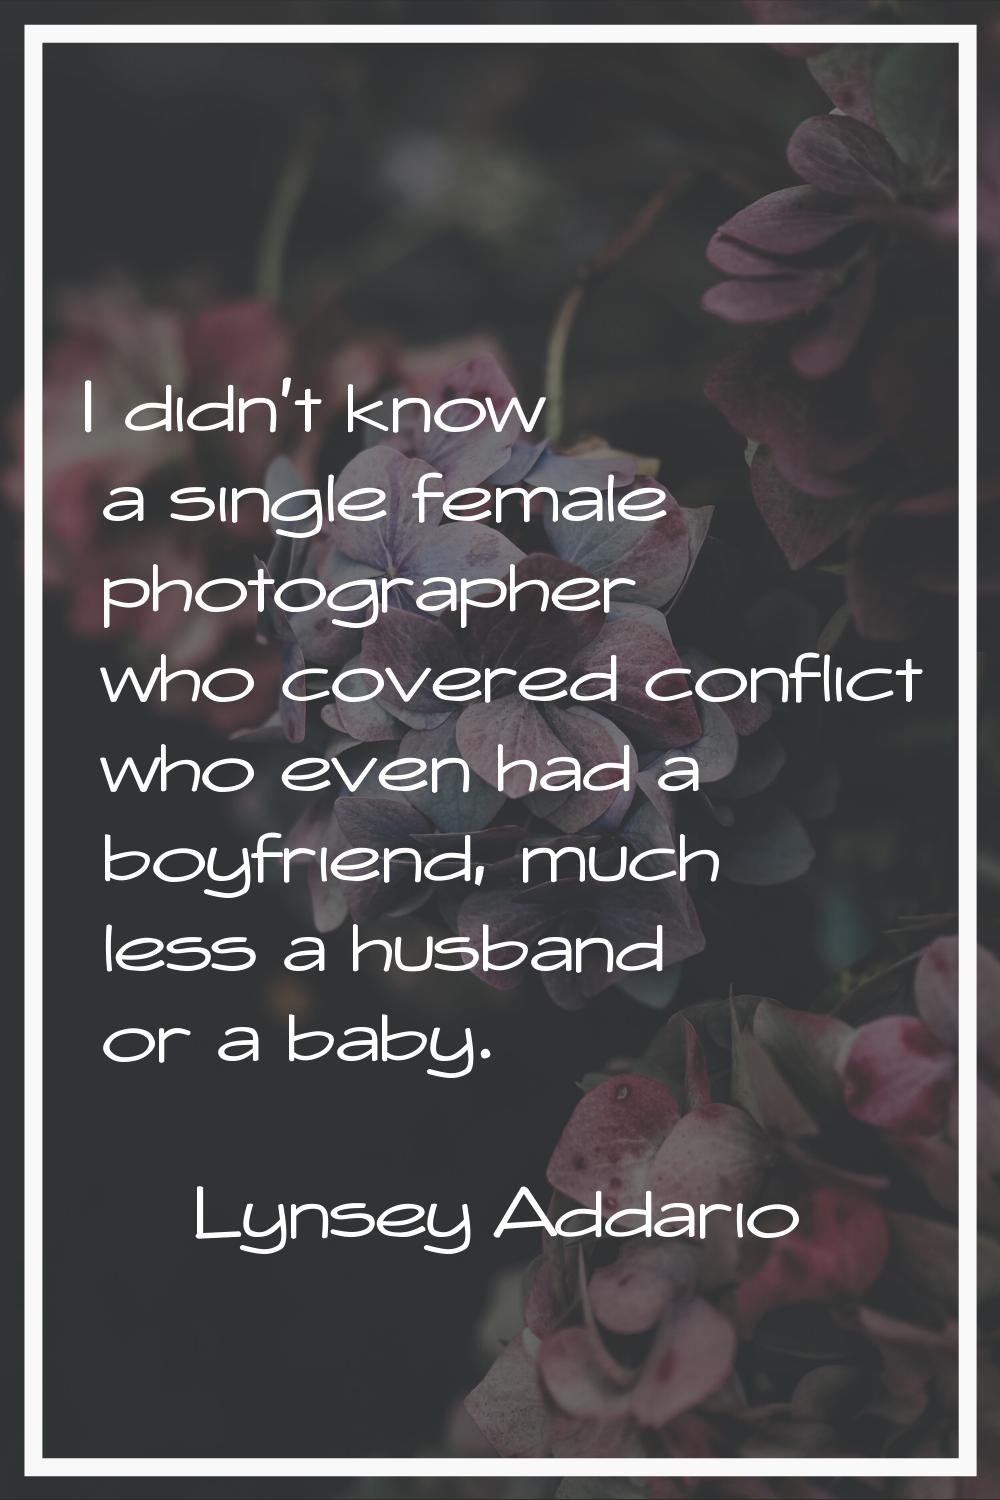 I didn't know a single female photographer who covered conflict who even had a boyfriend, much less